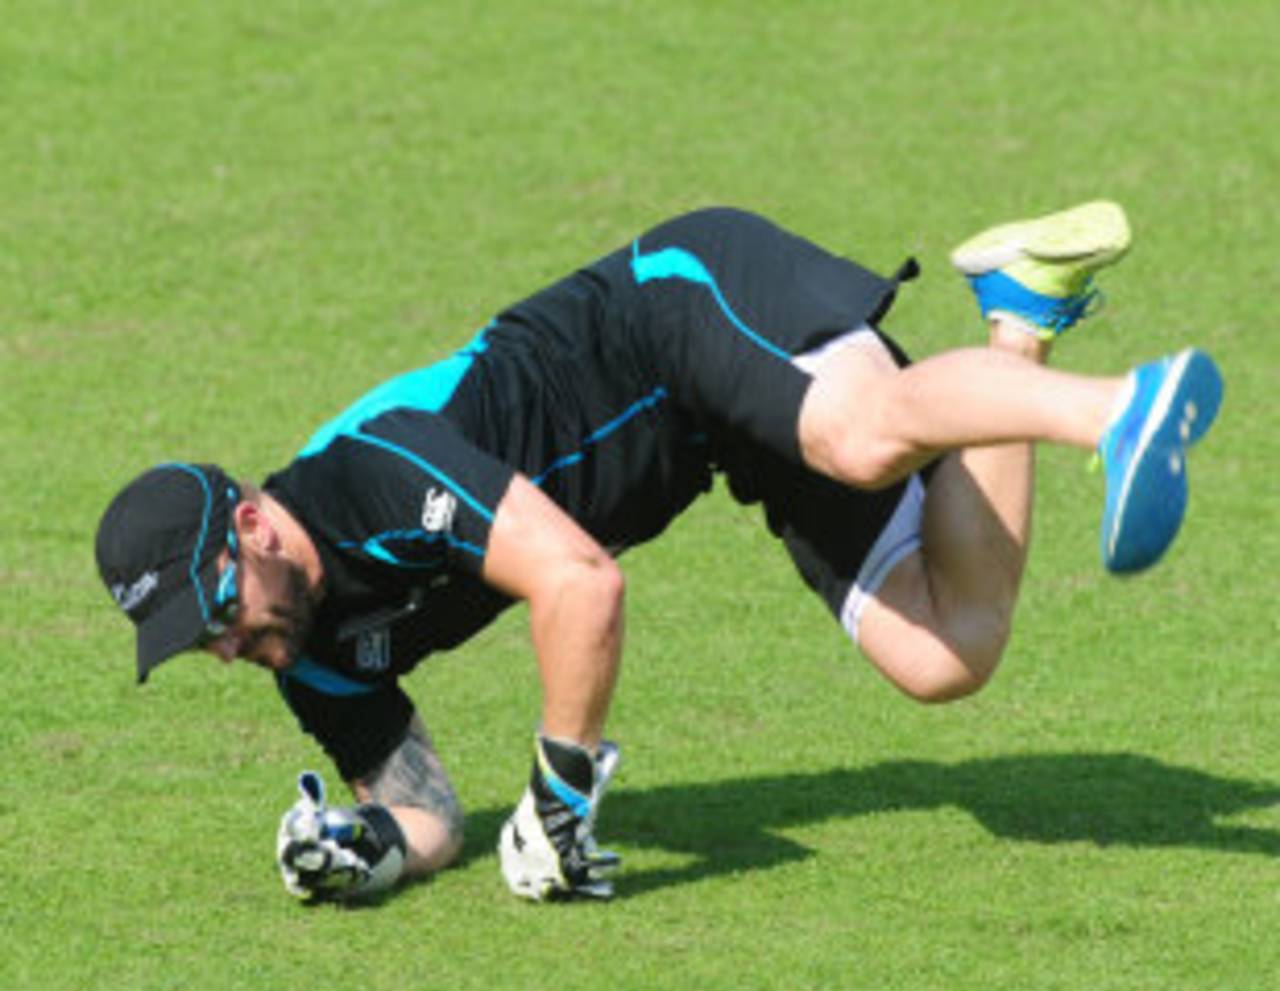 Brendon McCullum dives for a catch during training, Mirpur, October 28, 2013